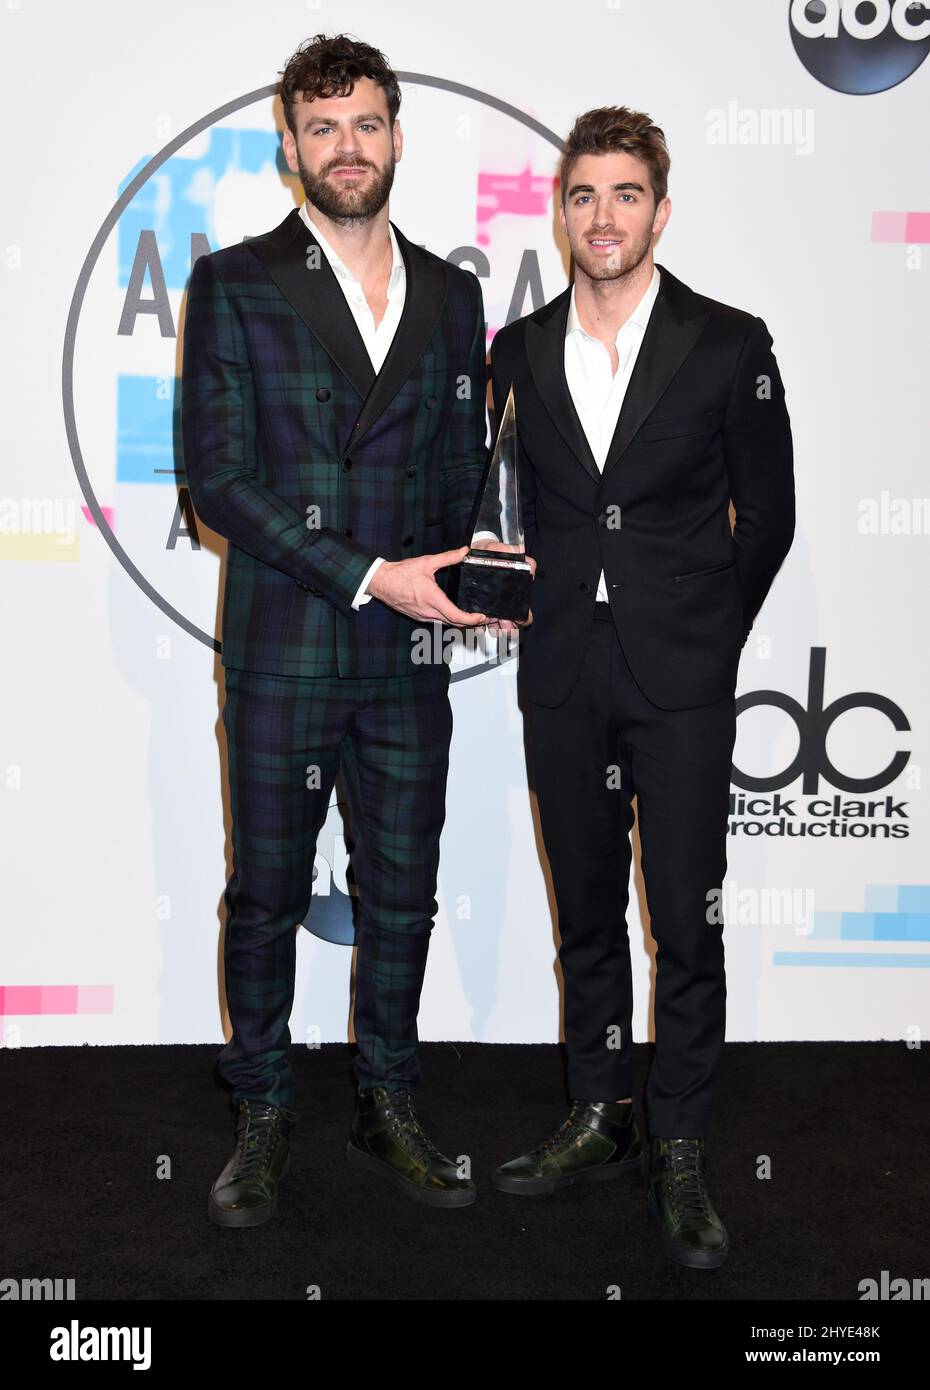 The Chainsmokers at the 2017 American Music Awards held at the Microsoft Theatre L.A. Live Stock Photo